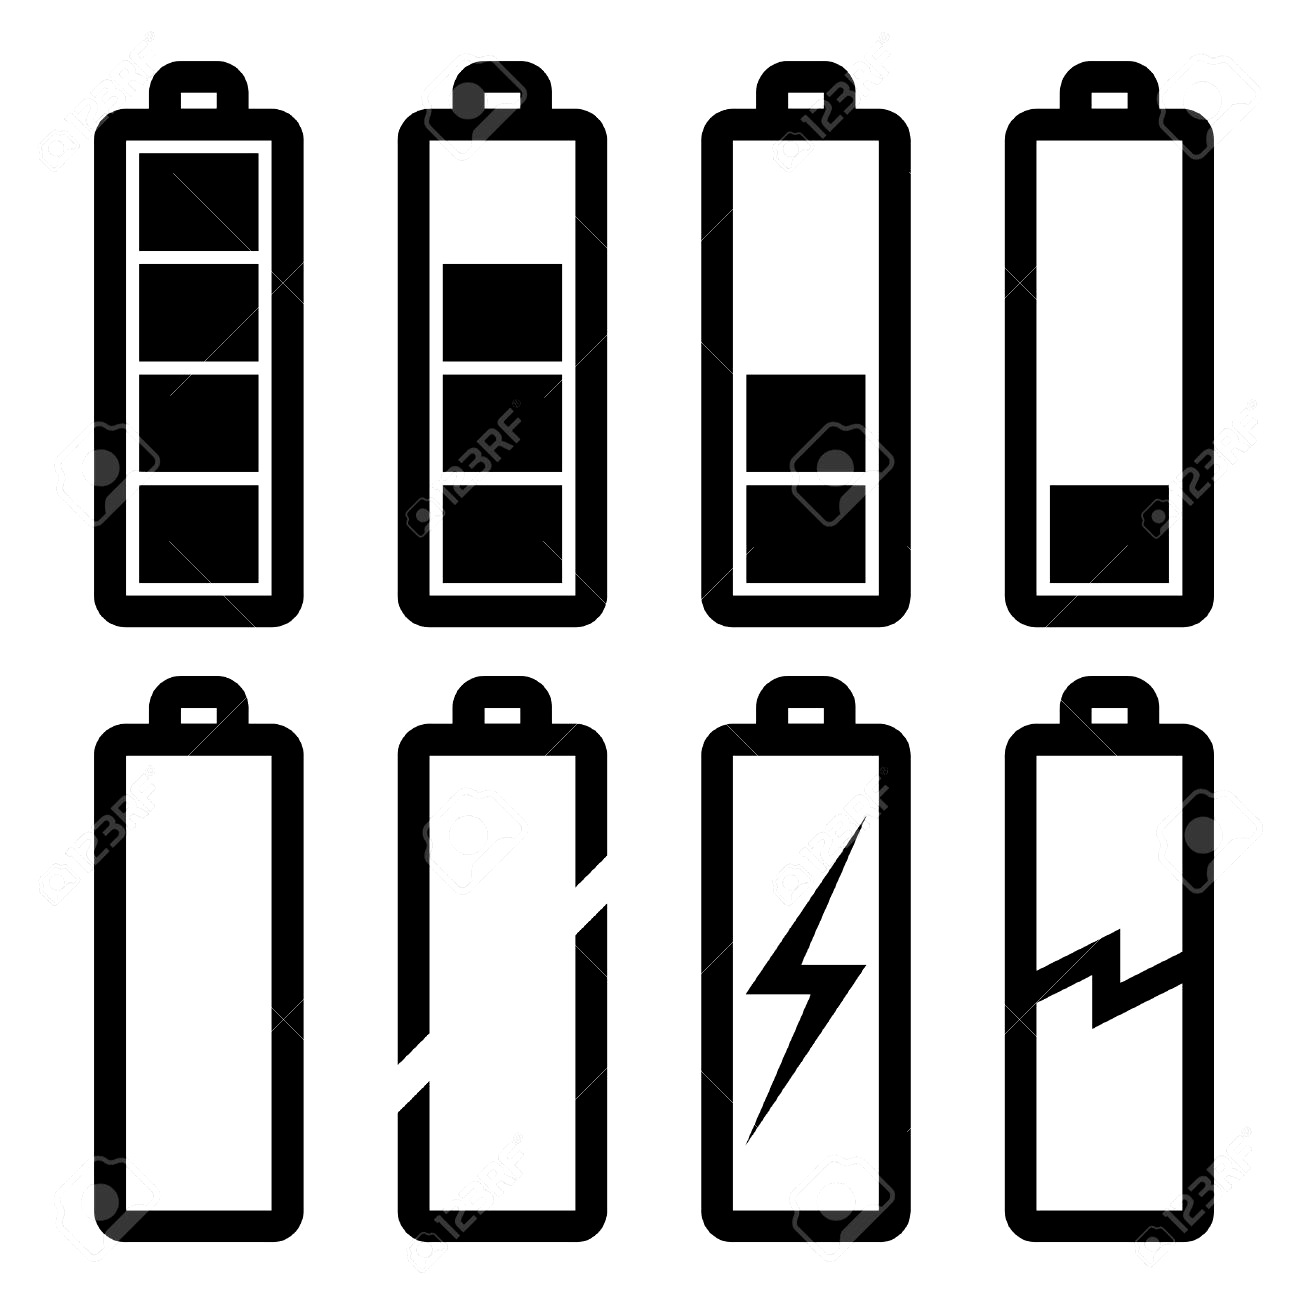 Component. symbol of a battery: Parallel Connected Cell Symbols ...